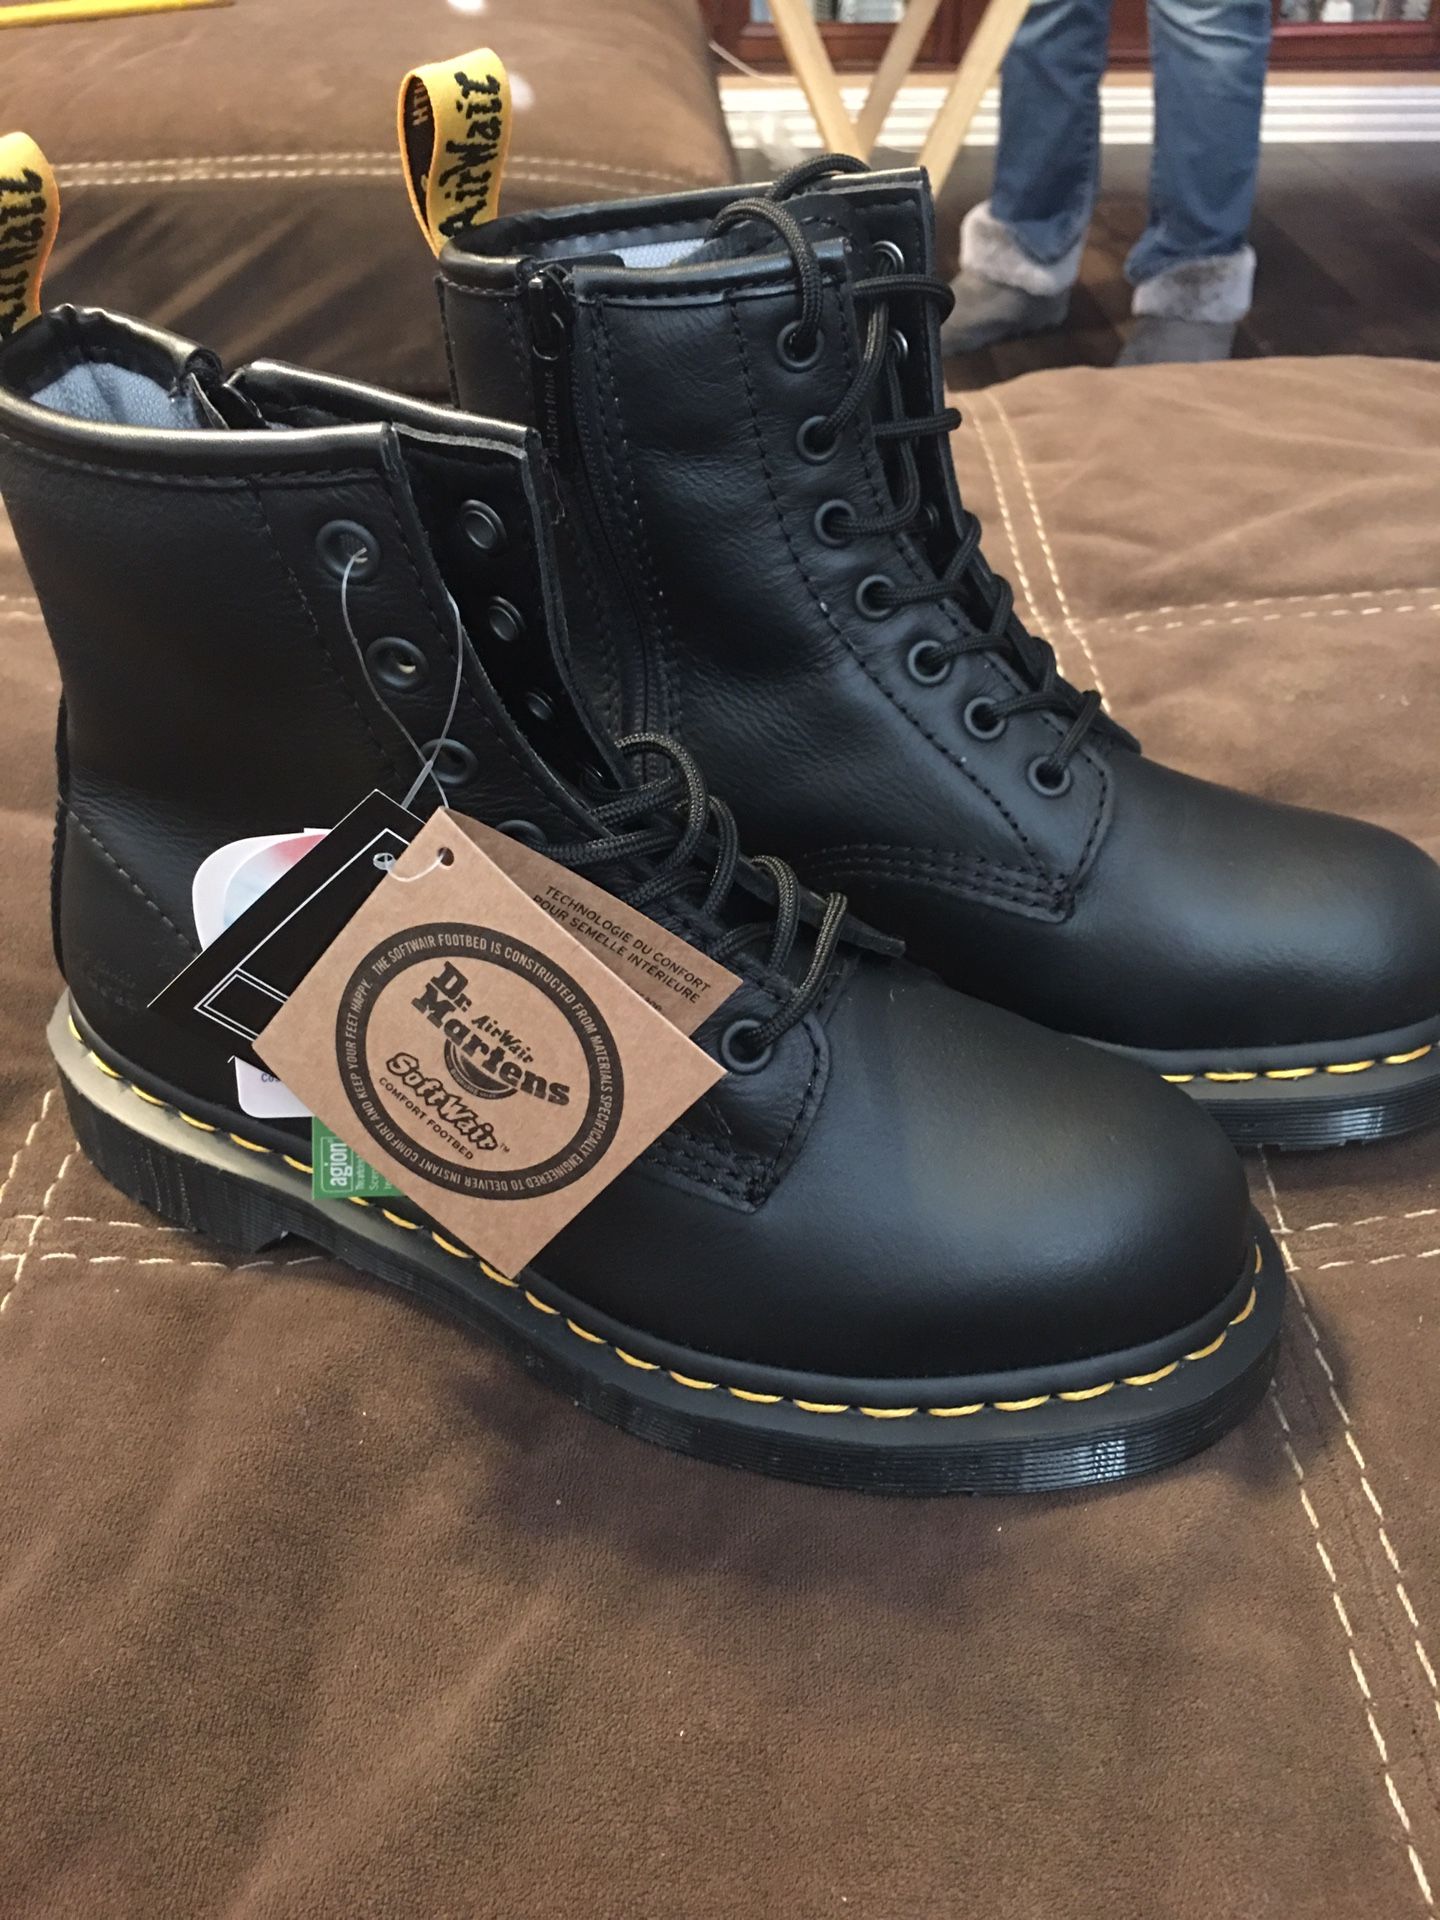 Dr. Martens Steel Toe Safety Boots-Womens Size 6